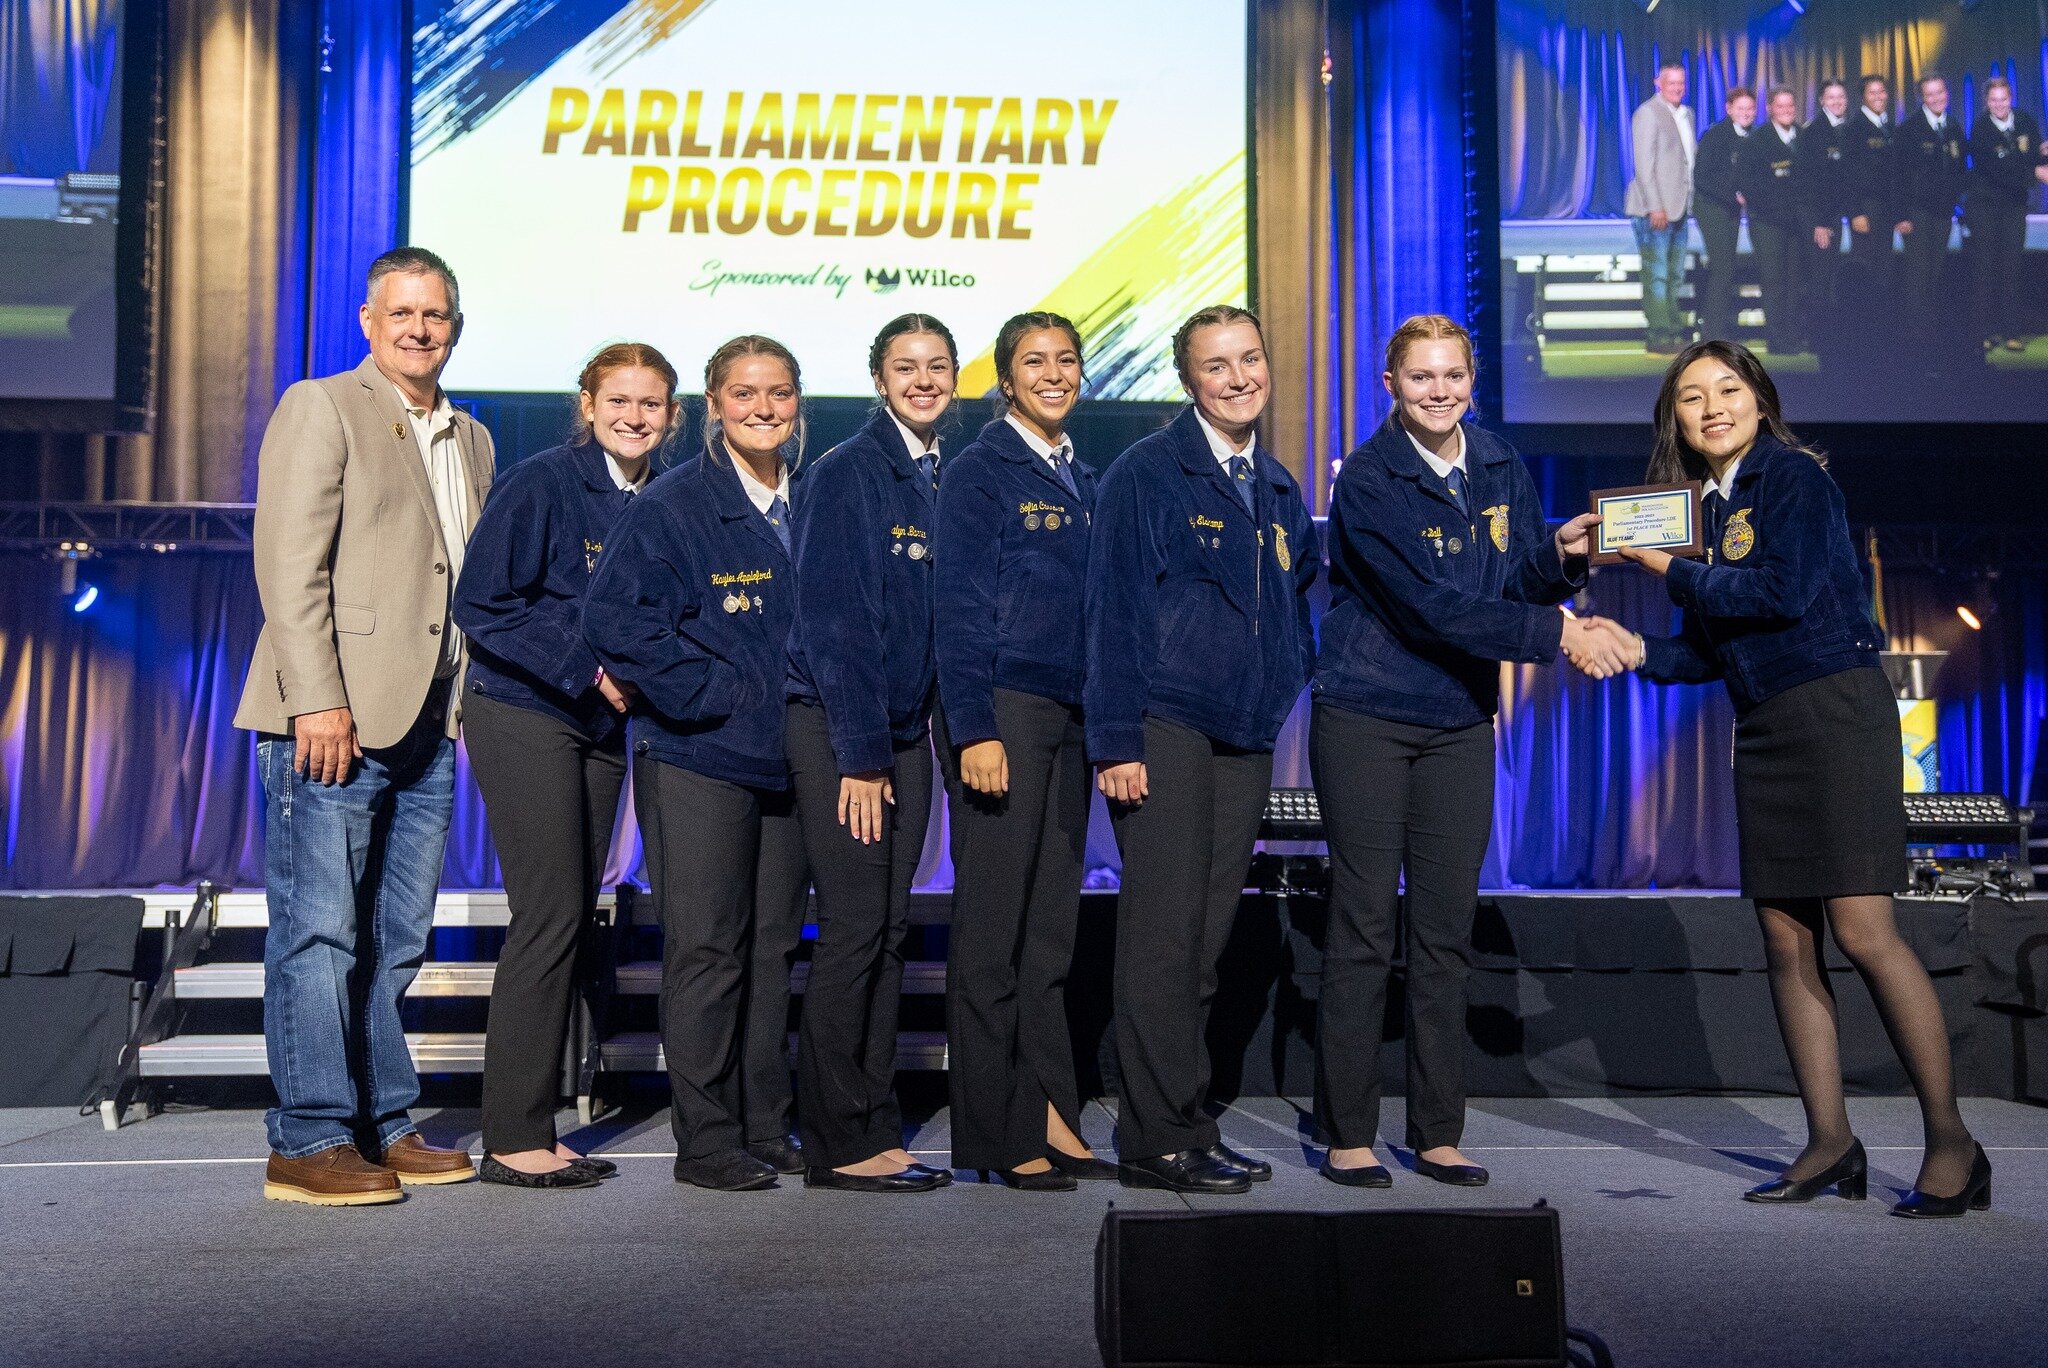 🏆 WINNER UPDATE 🏆

Last, but certainly not least, in the Super Bowl CDE, Asotin (Carlie) takes the title! Congratulations to Asotin FFA and all contestants of the 2023 State Parliamentary Procedure LDE! 🧑🏻&zwj;⚖️

Full Results:
&raquo; 2nd :: Elm